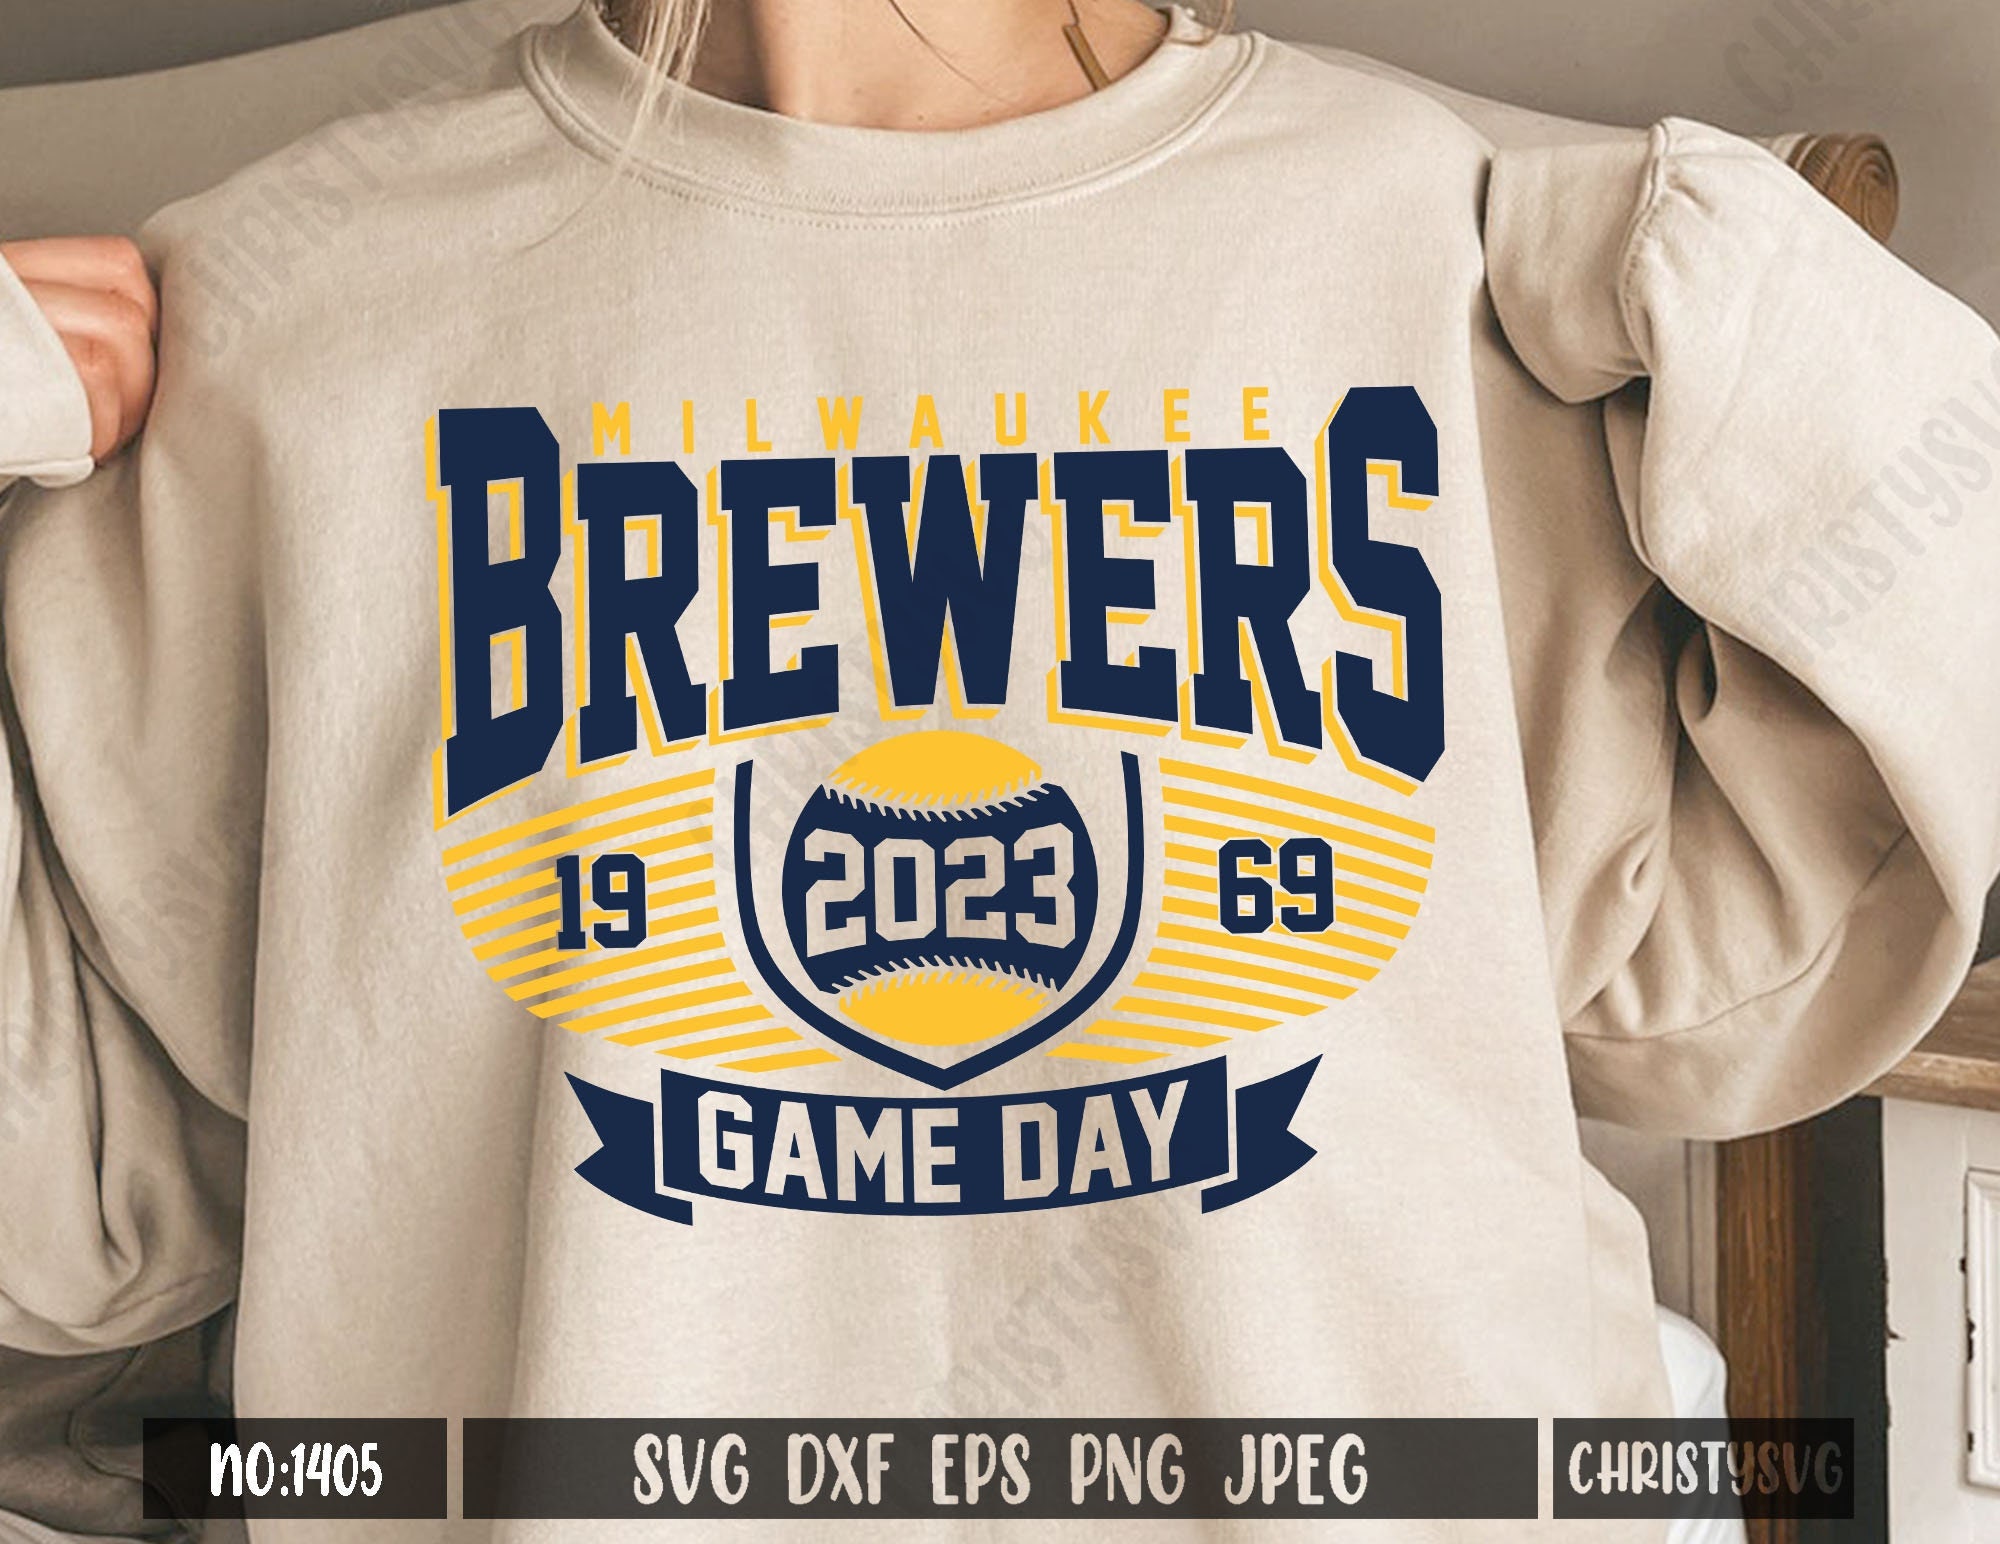 Brewers City Connect Uniforms - Milwaukee Brewers Talk - Brewer Fanatic